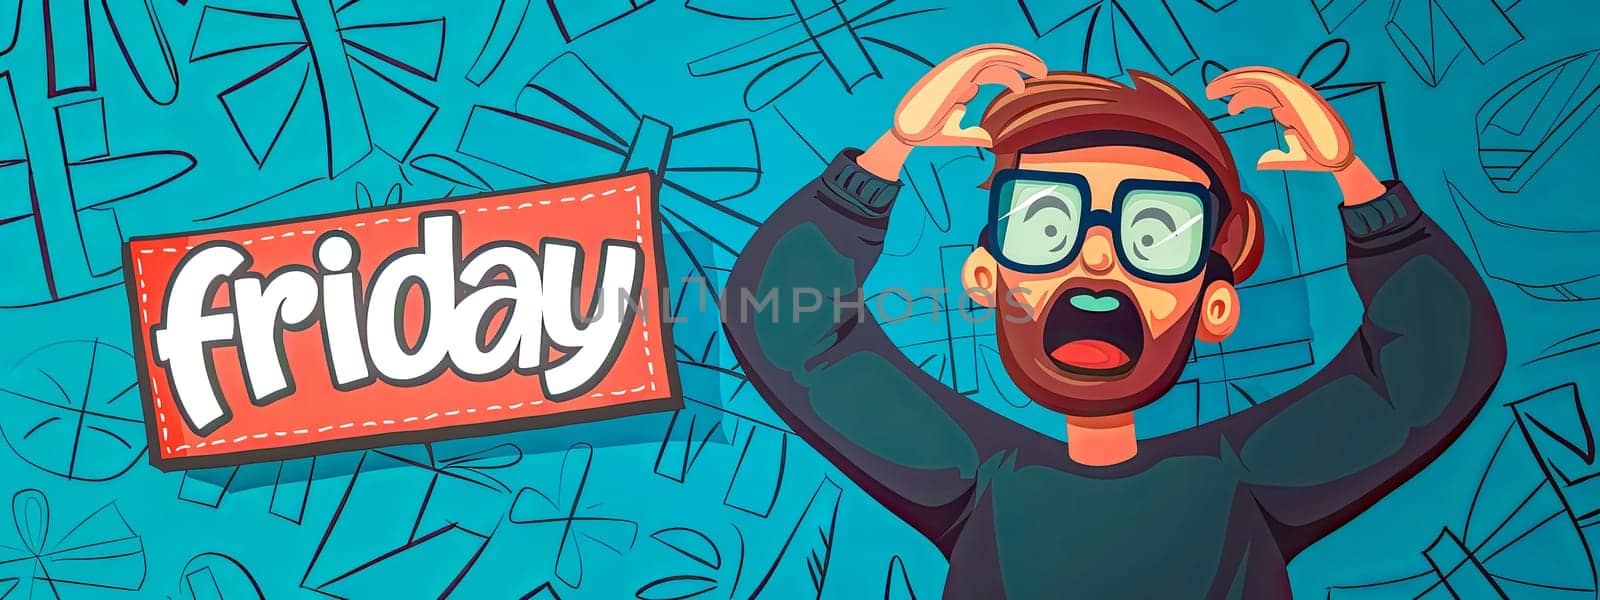 Cheerful cartoon character celebrating with 'friday' sign on a vibrant background